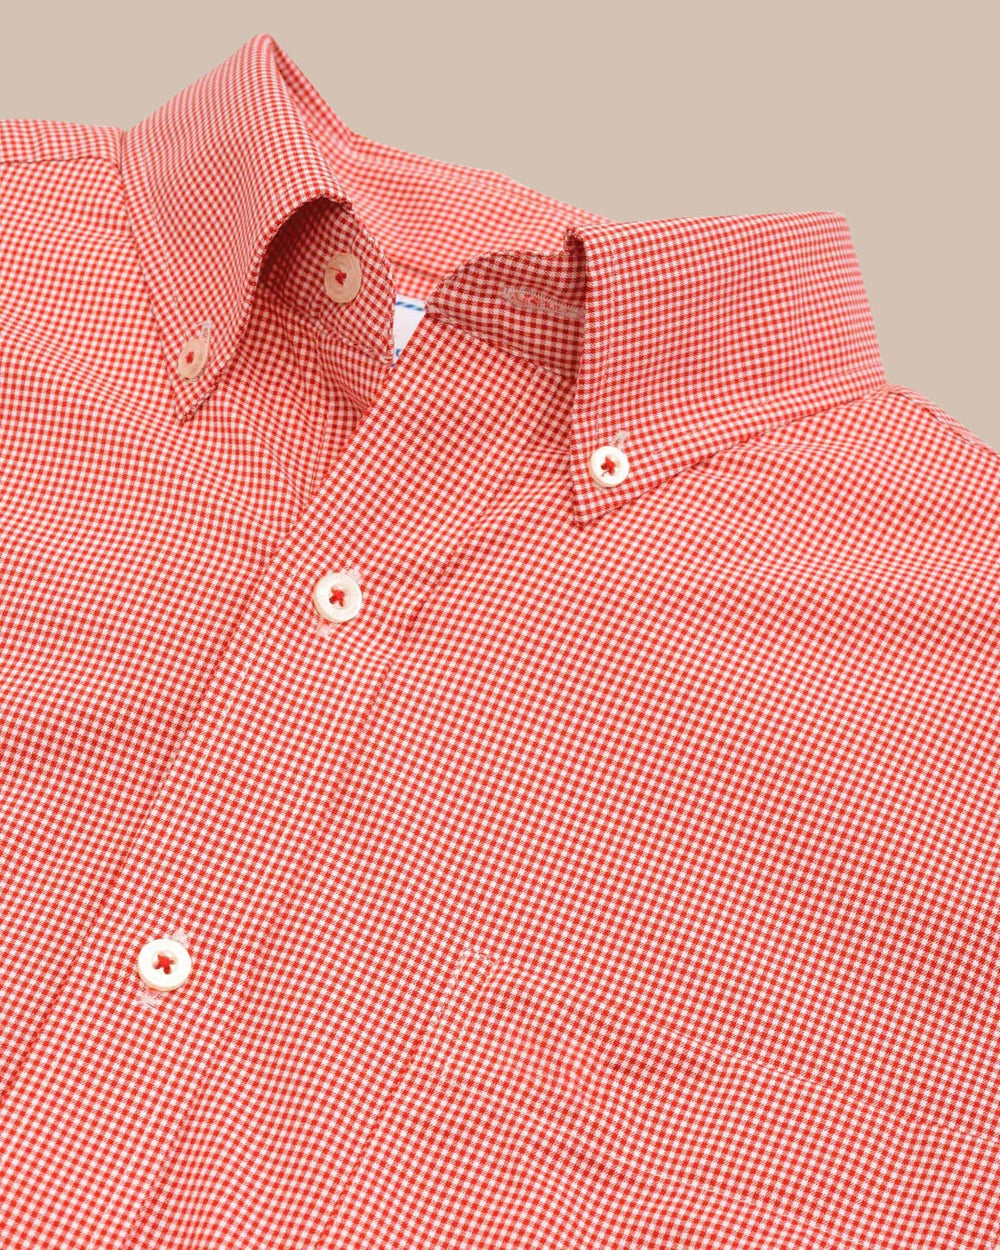 The detail view of the Southern Tide Team Colors Gingham Intercoastal Sport Shirt by Southern Tide - Endzone Orange